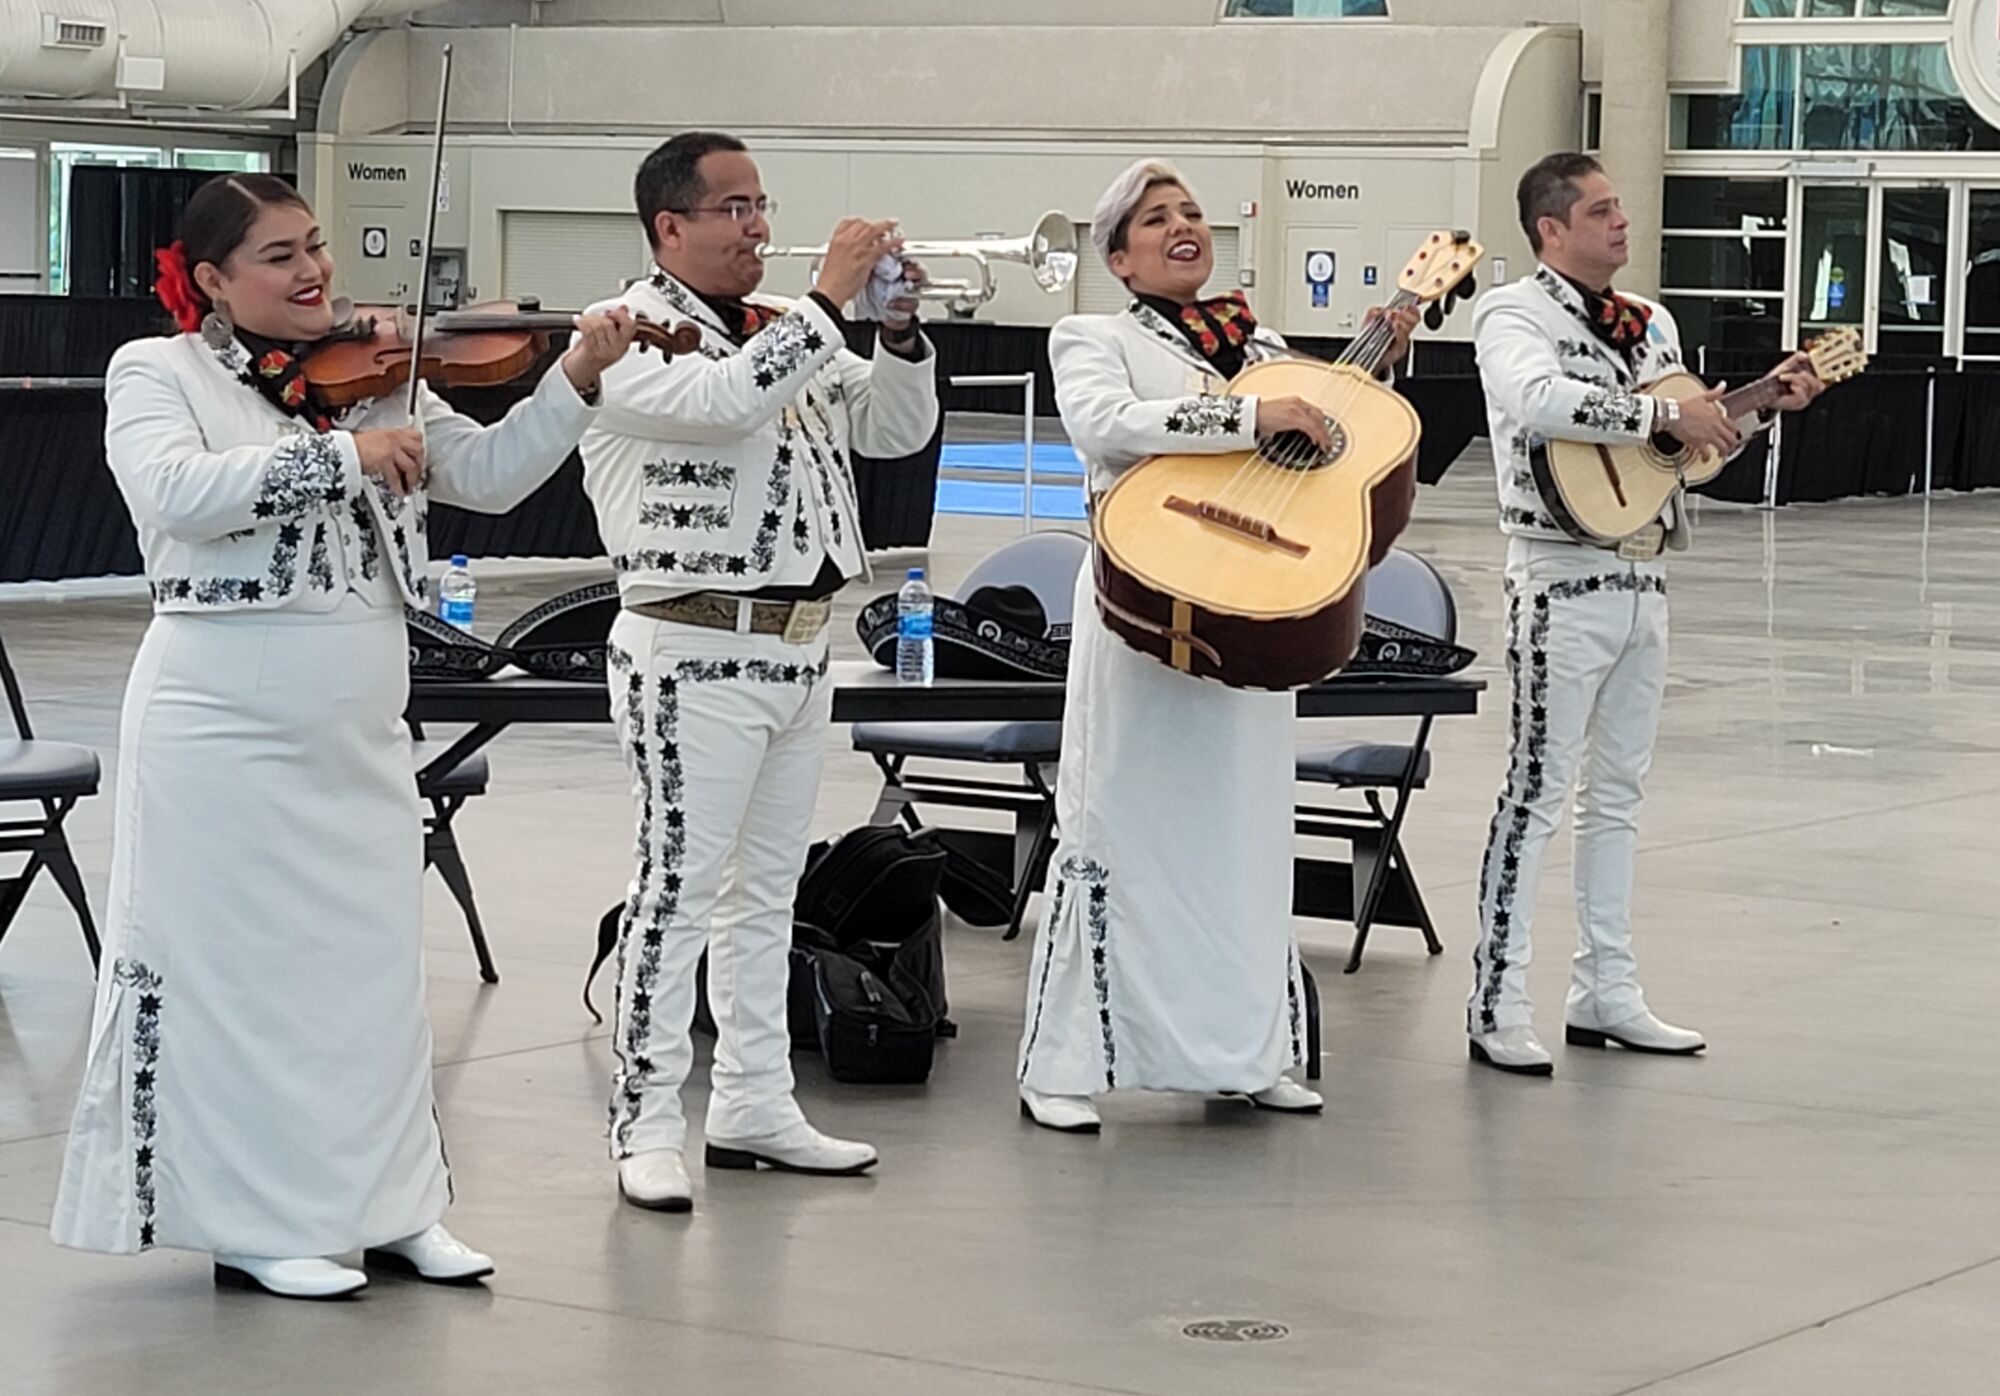 Four musicians dressed in white play mariachi music